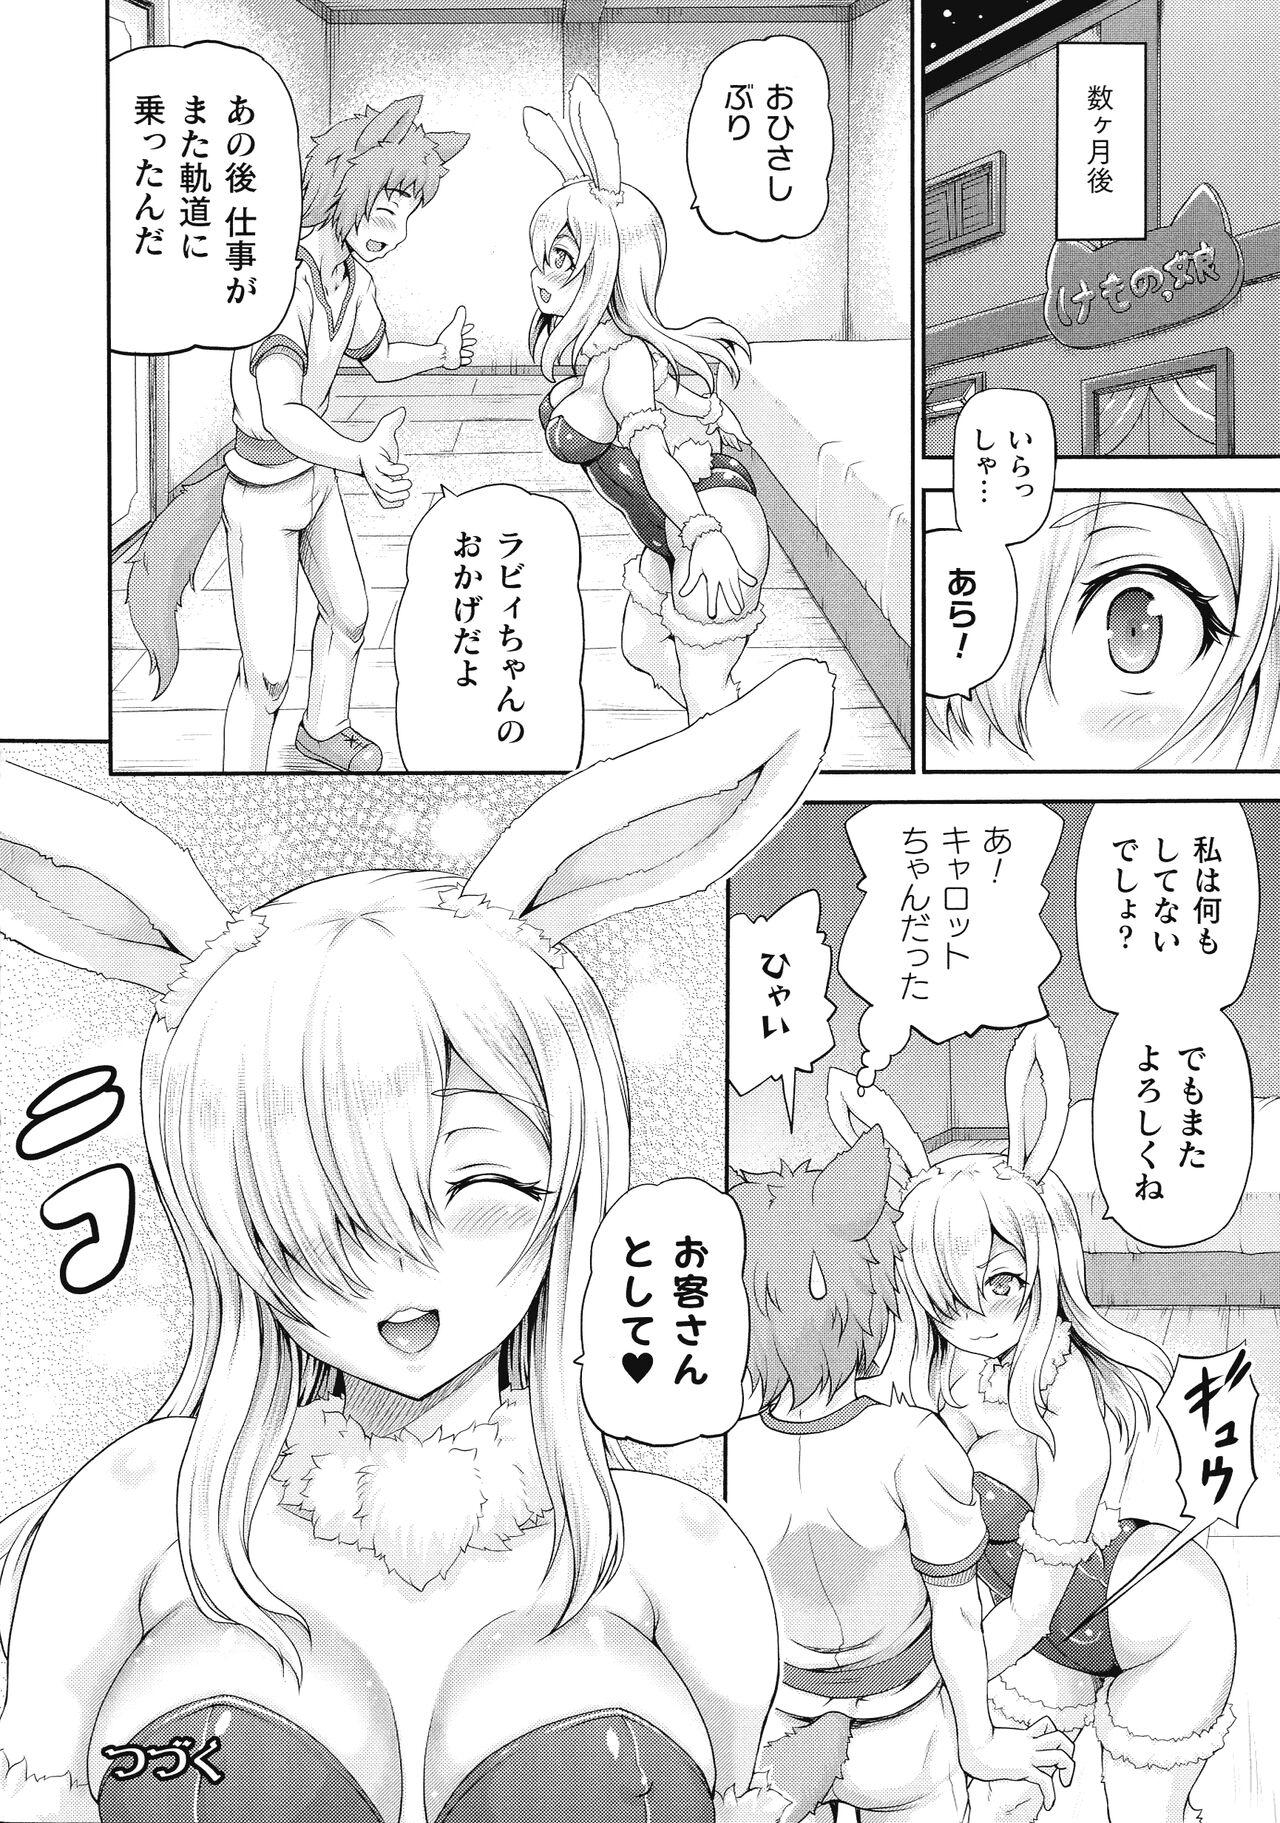 Isekai Shoukan 3 - Brothel in Another World 135